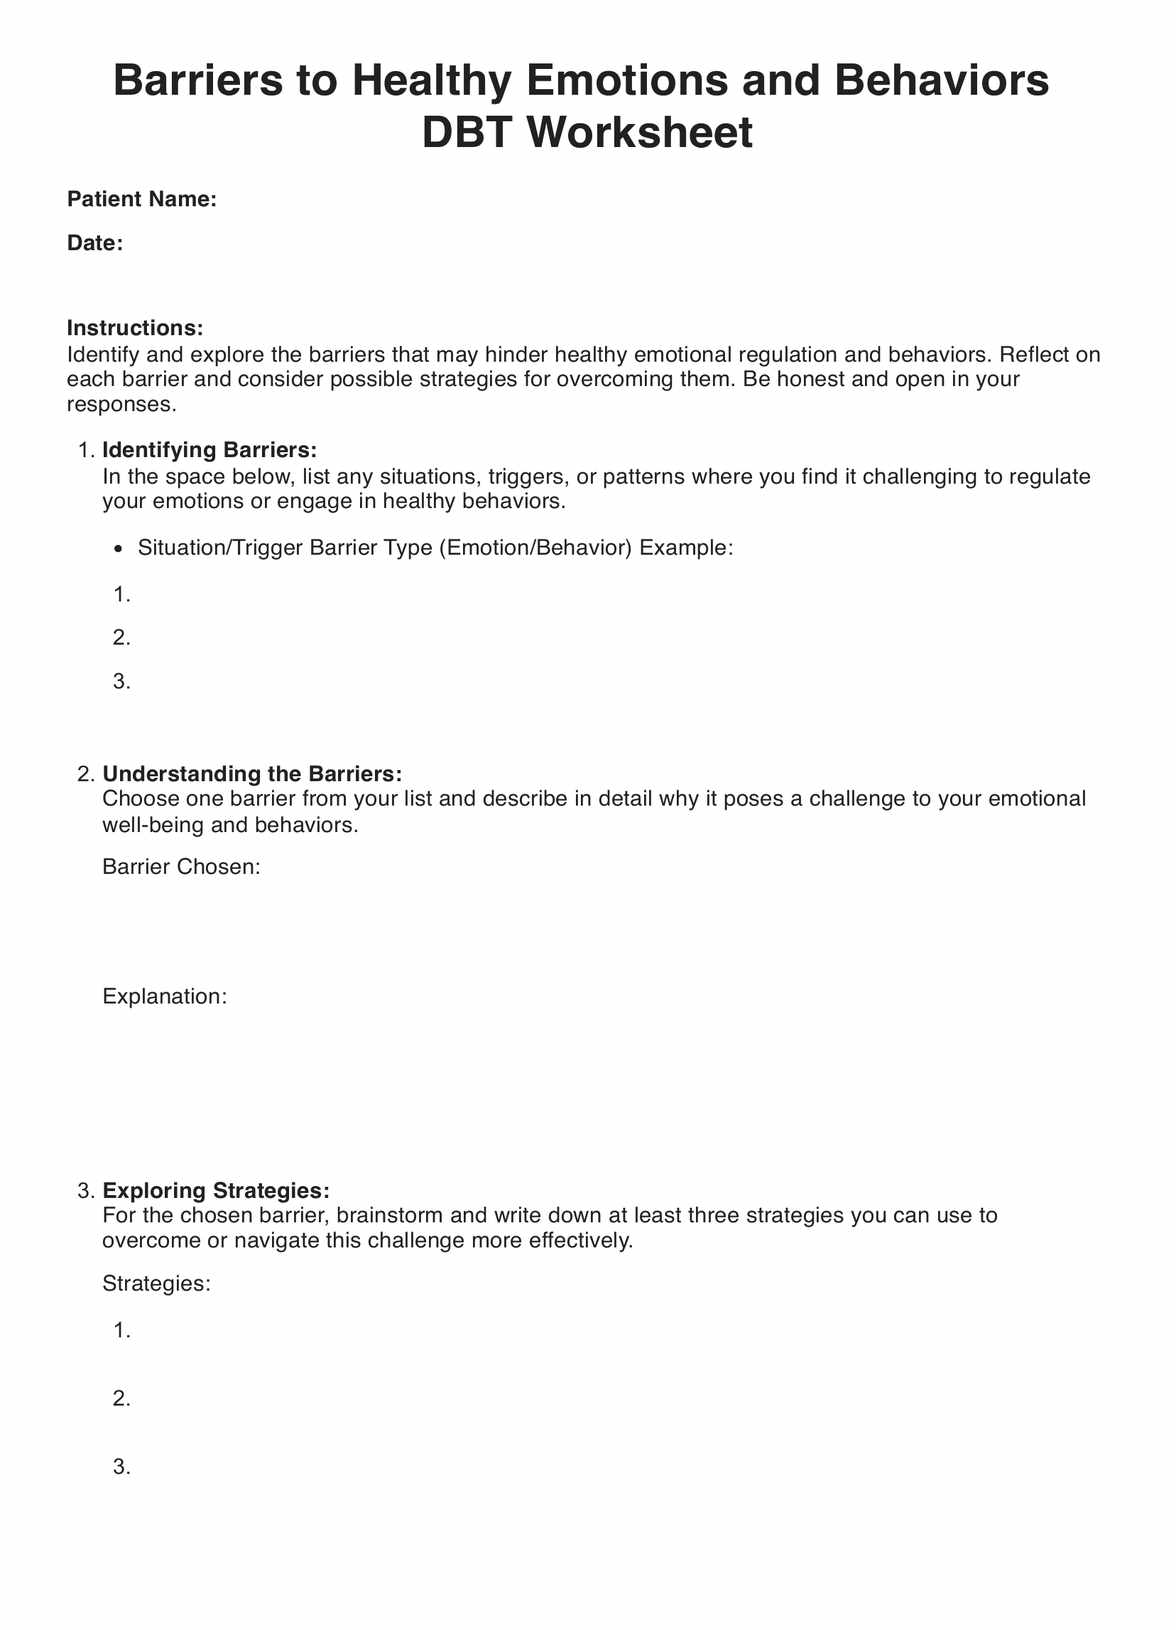 Barriers to Healthy Emotions and Behaviors DBT Worksheet PDF Example